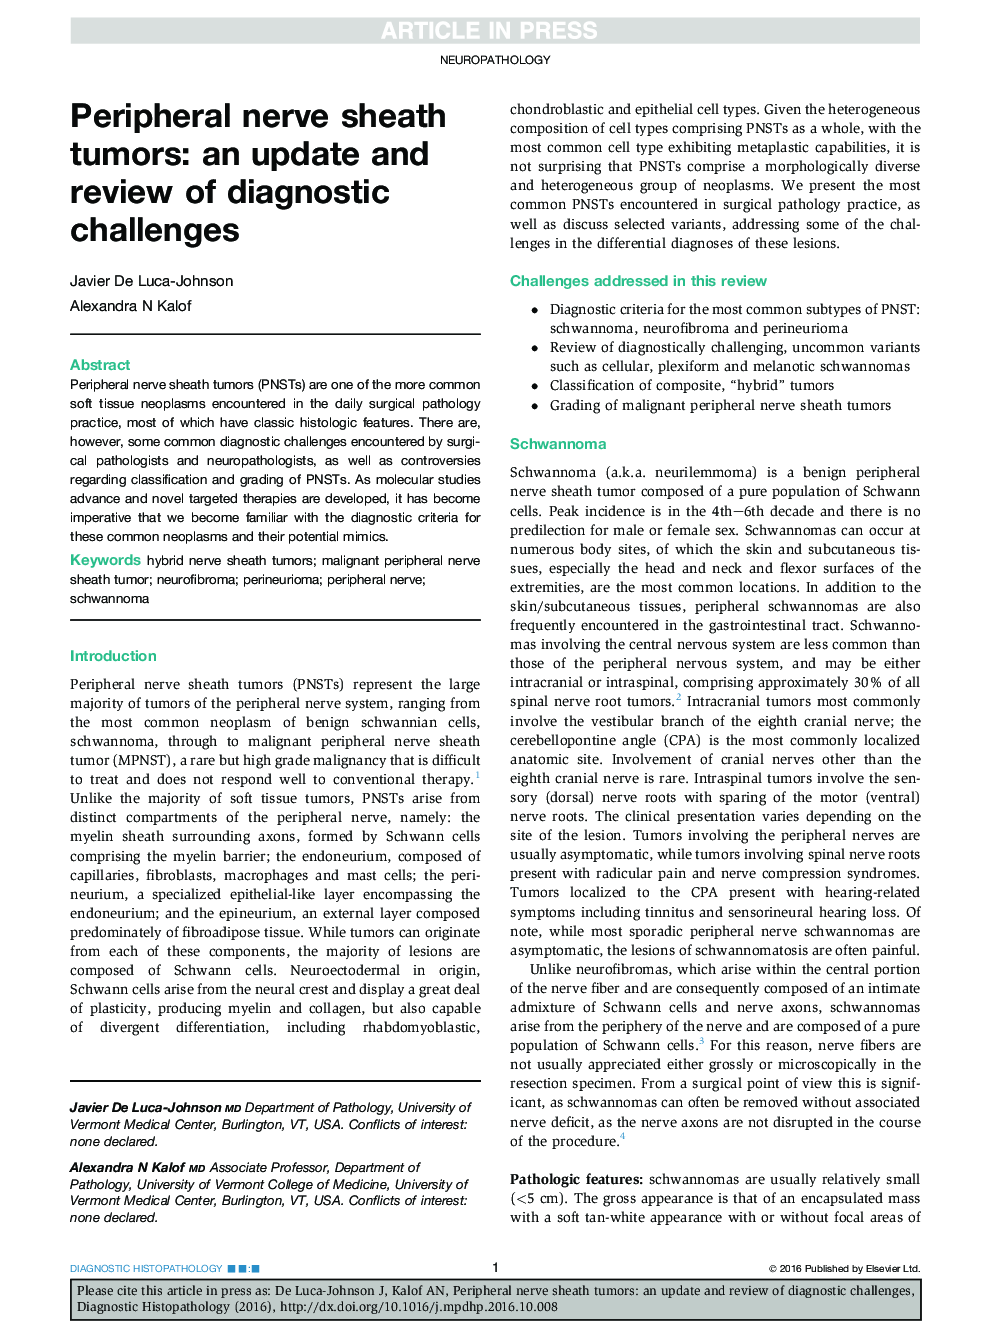 Peripheral nerve sheath tumors: an update and review of diagnostic challenges